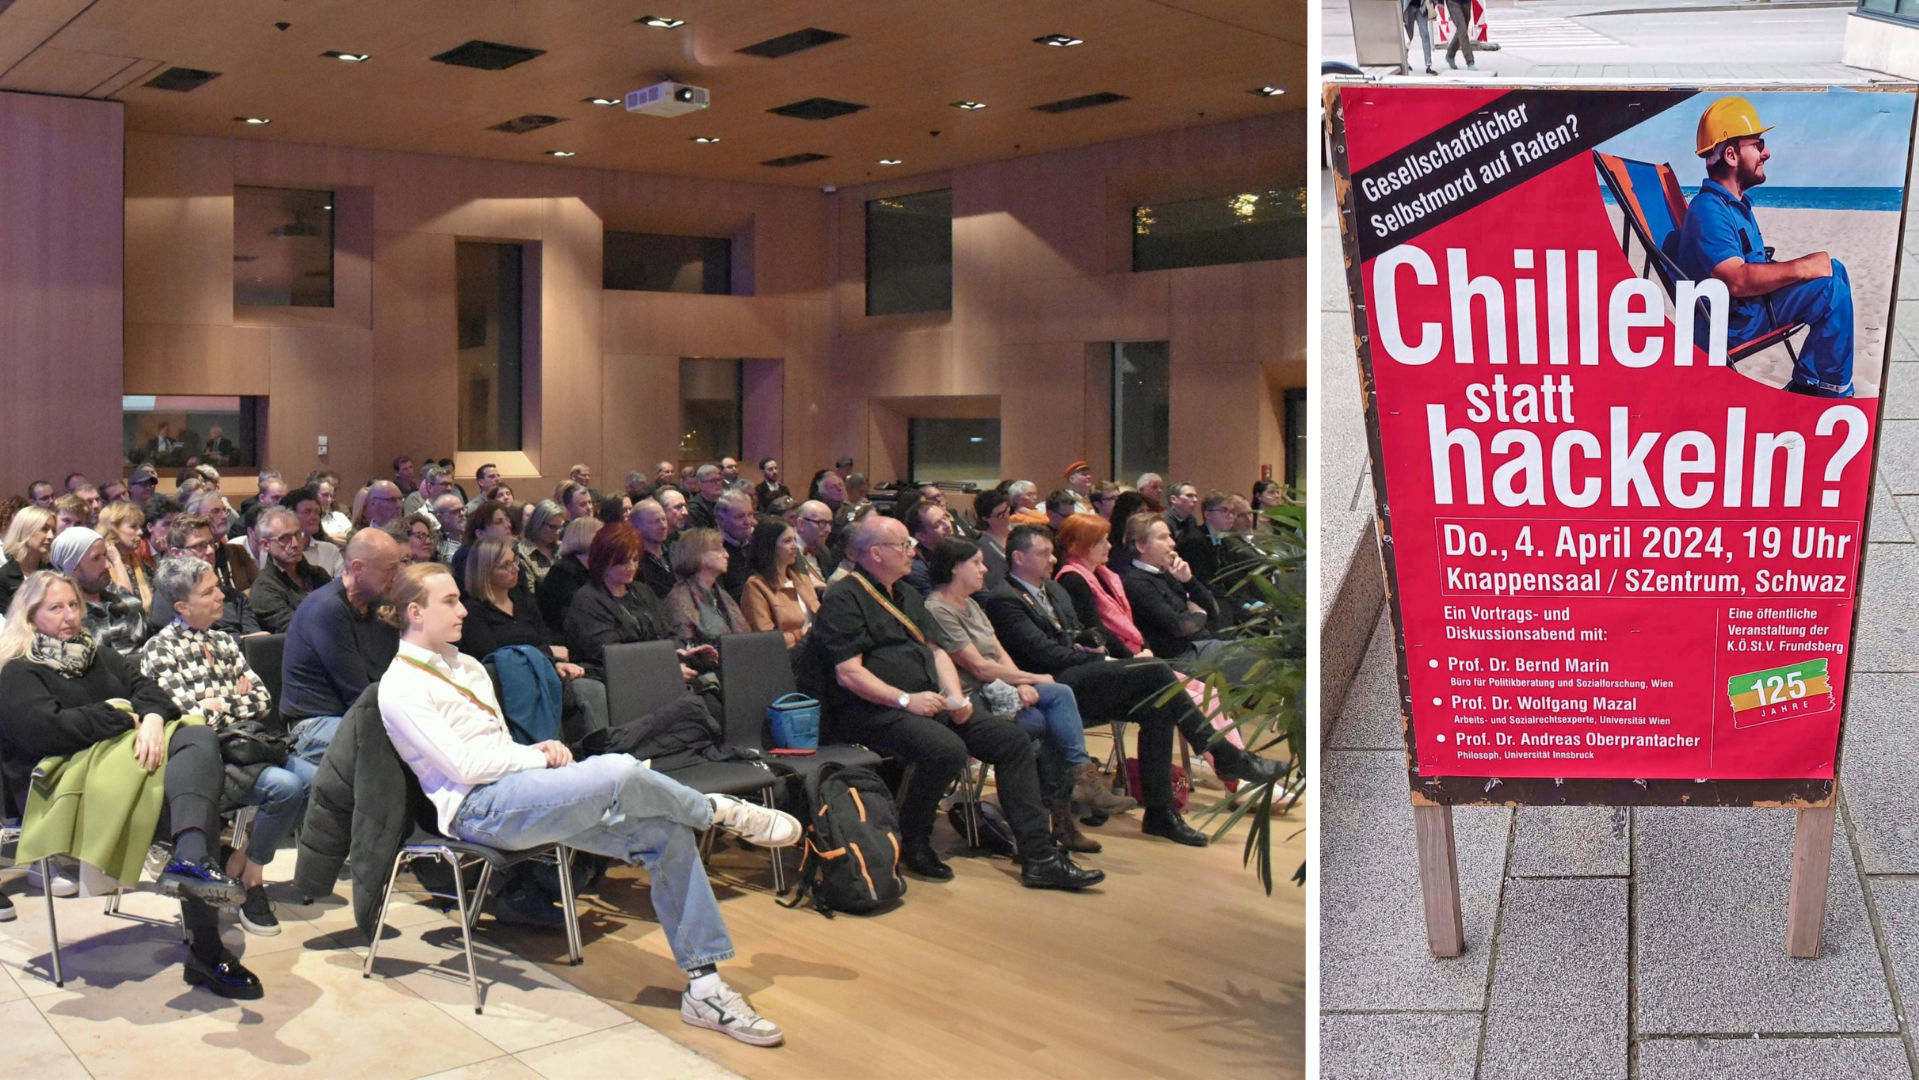 The Knappensaal in the SZentrum in Schwaz was filled almost to capacity in view of the polarizing topic. Posters advertised the evening in advance. (Bild: Manuel Schwaiger)